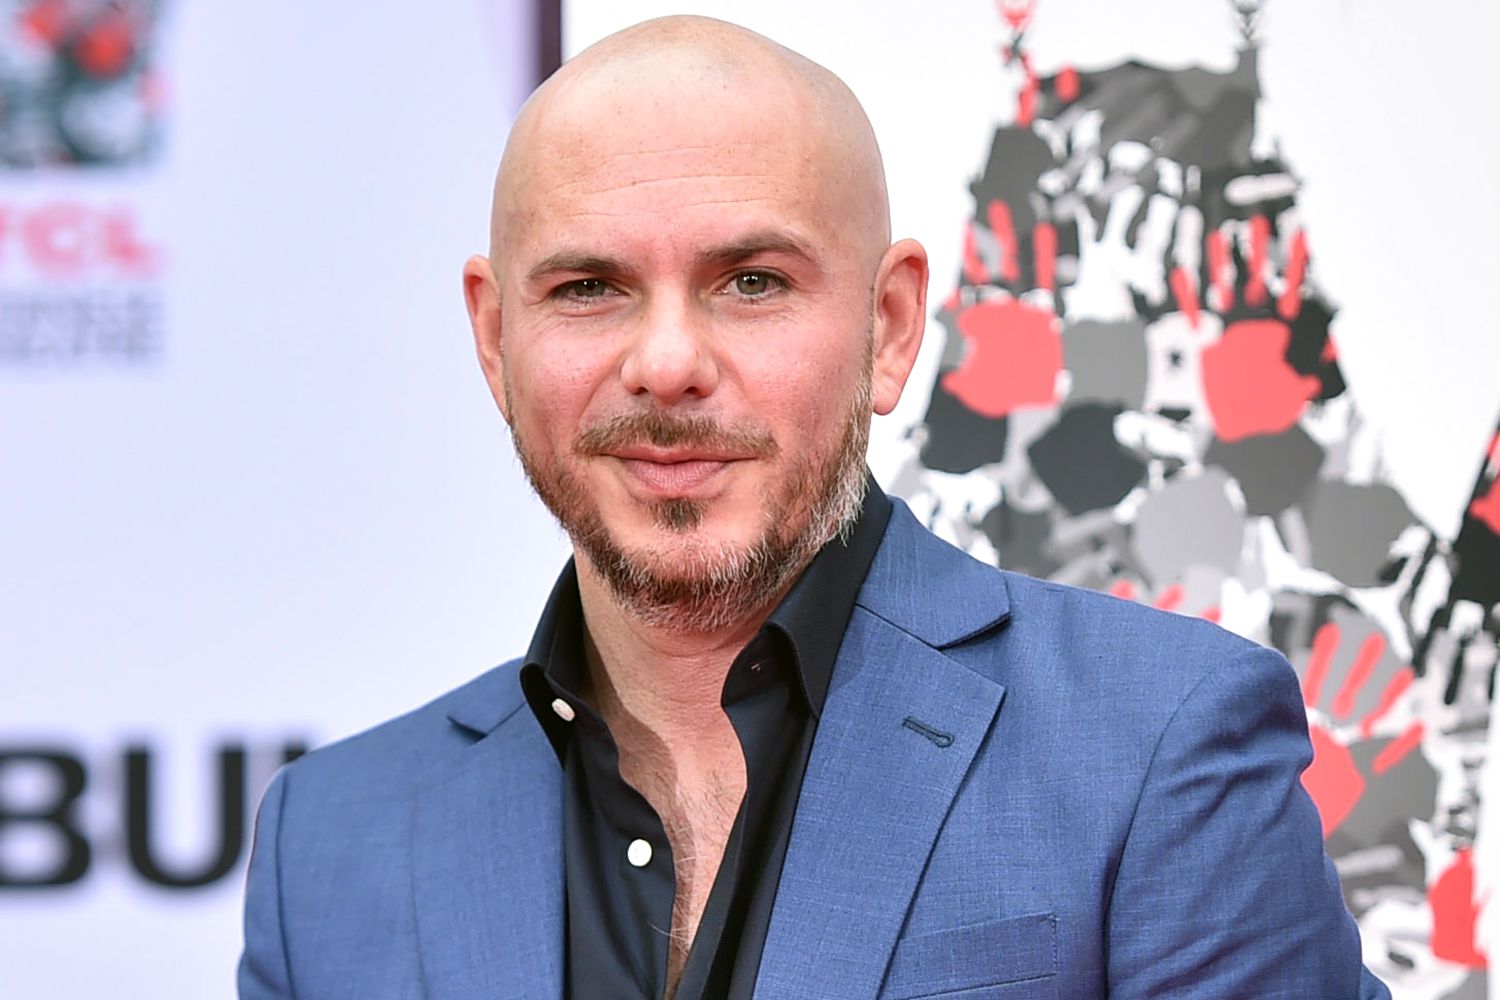 Pitbull New Song Proceeds Go to COVID-19 Relief | PEOPLE.com